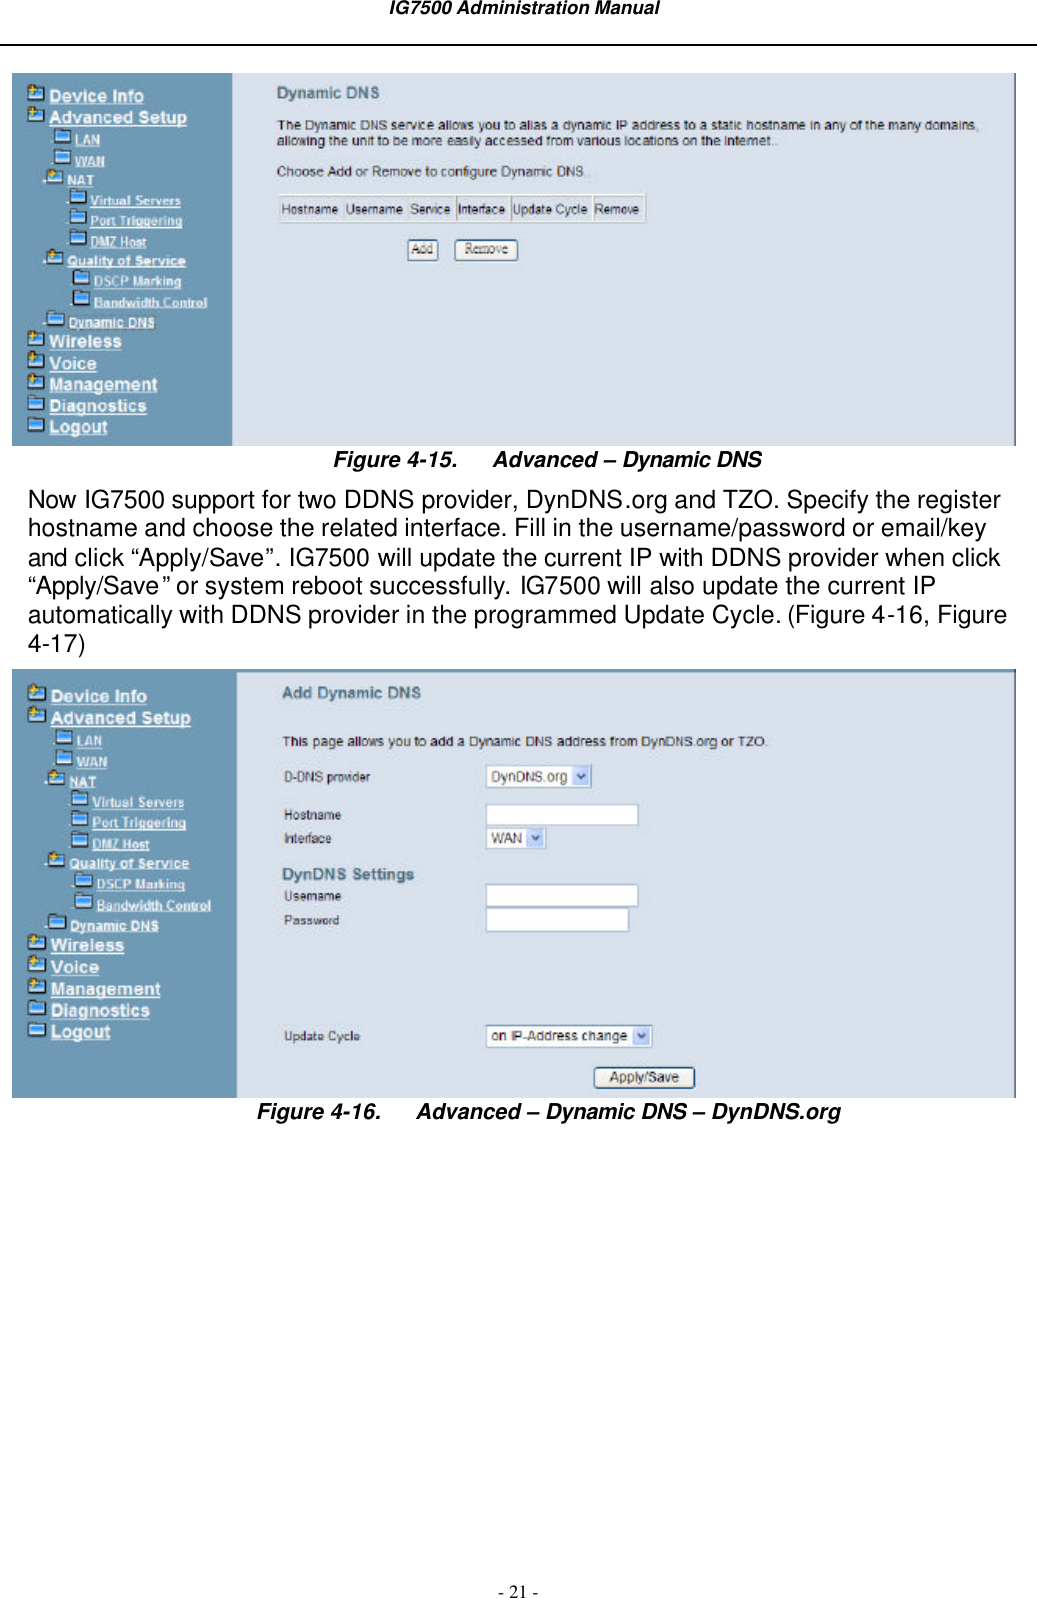  IG7500 Administration Manual  - 21 -  Figure 4-15. Advanced – Dynamic DNS Now IG7500 support for two DDNS provider, DynDNS.org and TZO. Specify the register hostname and choose the related interface. Fill in the username/password or email/key and click “Apply/Save”. IG7500 will update the current IP with DDNS provider when click “Apply/Save” or system reboot successfully. IG7500 will also update the current IP automatically with DDNS provider in the programmed Update Cycle. (Figure 4-16, Figure 4-17)  Figure 4-16. Advanced – Dynamic DNS – DynDNS.org  